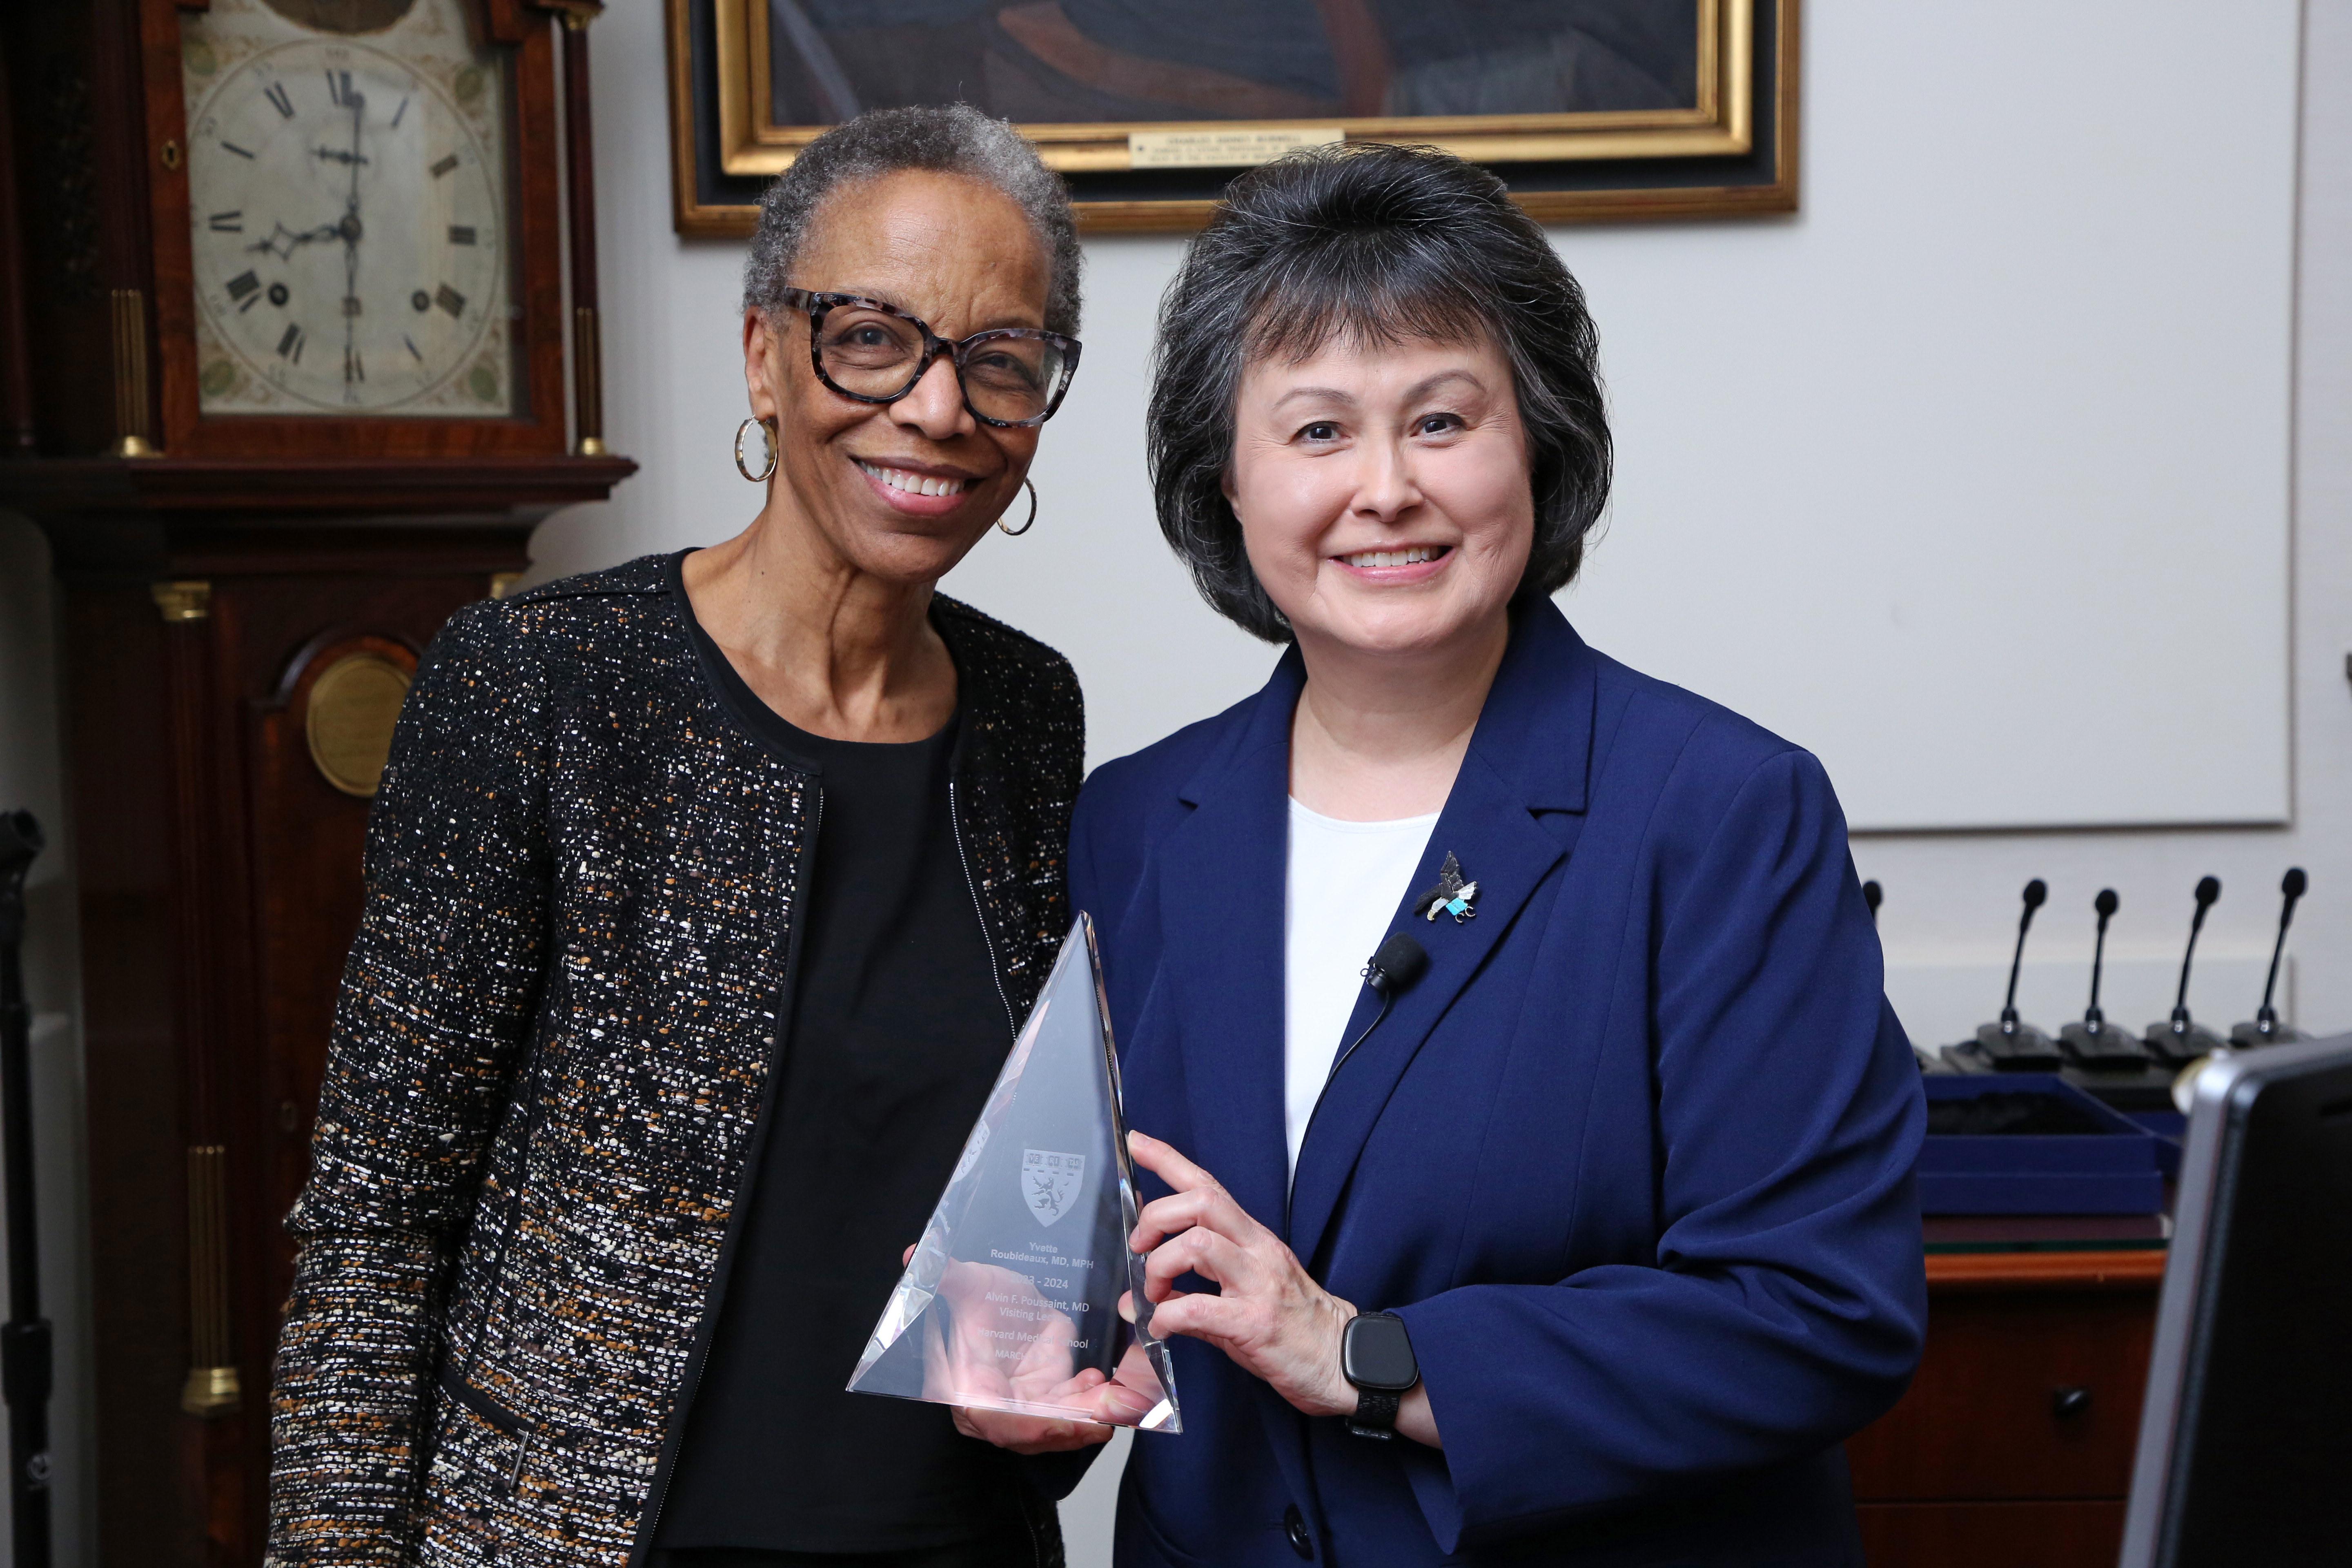 Yvette Roubideaux holds a triangular glass award and poses with Joan Reede.